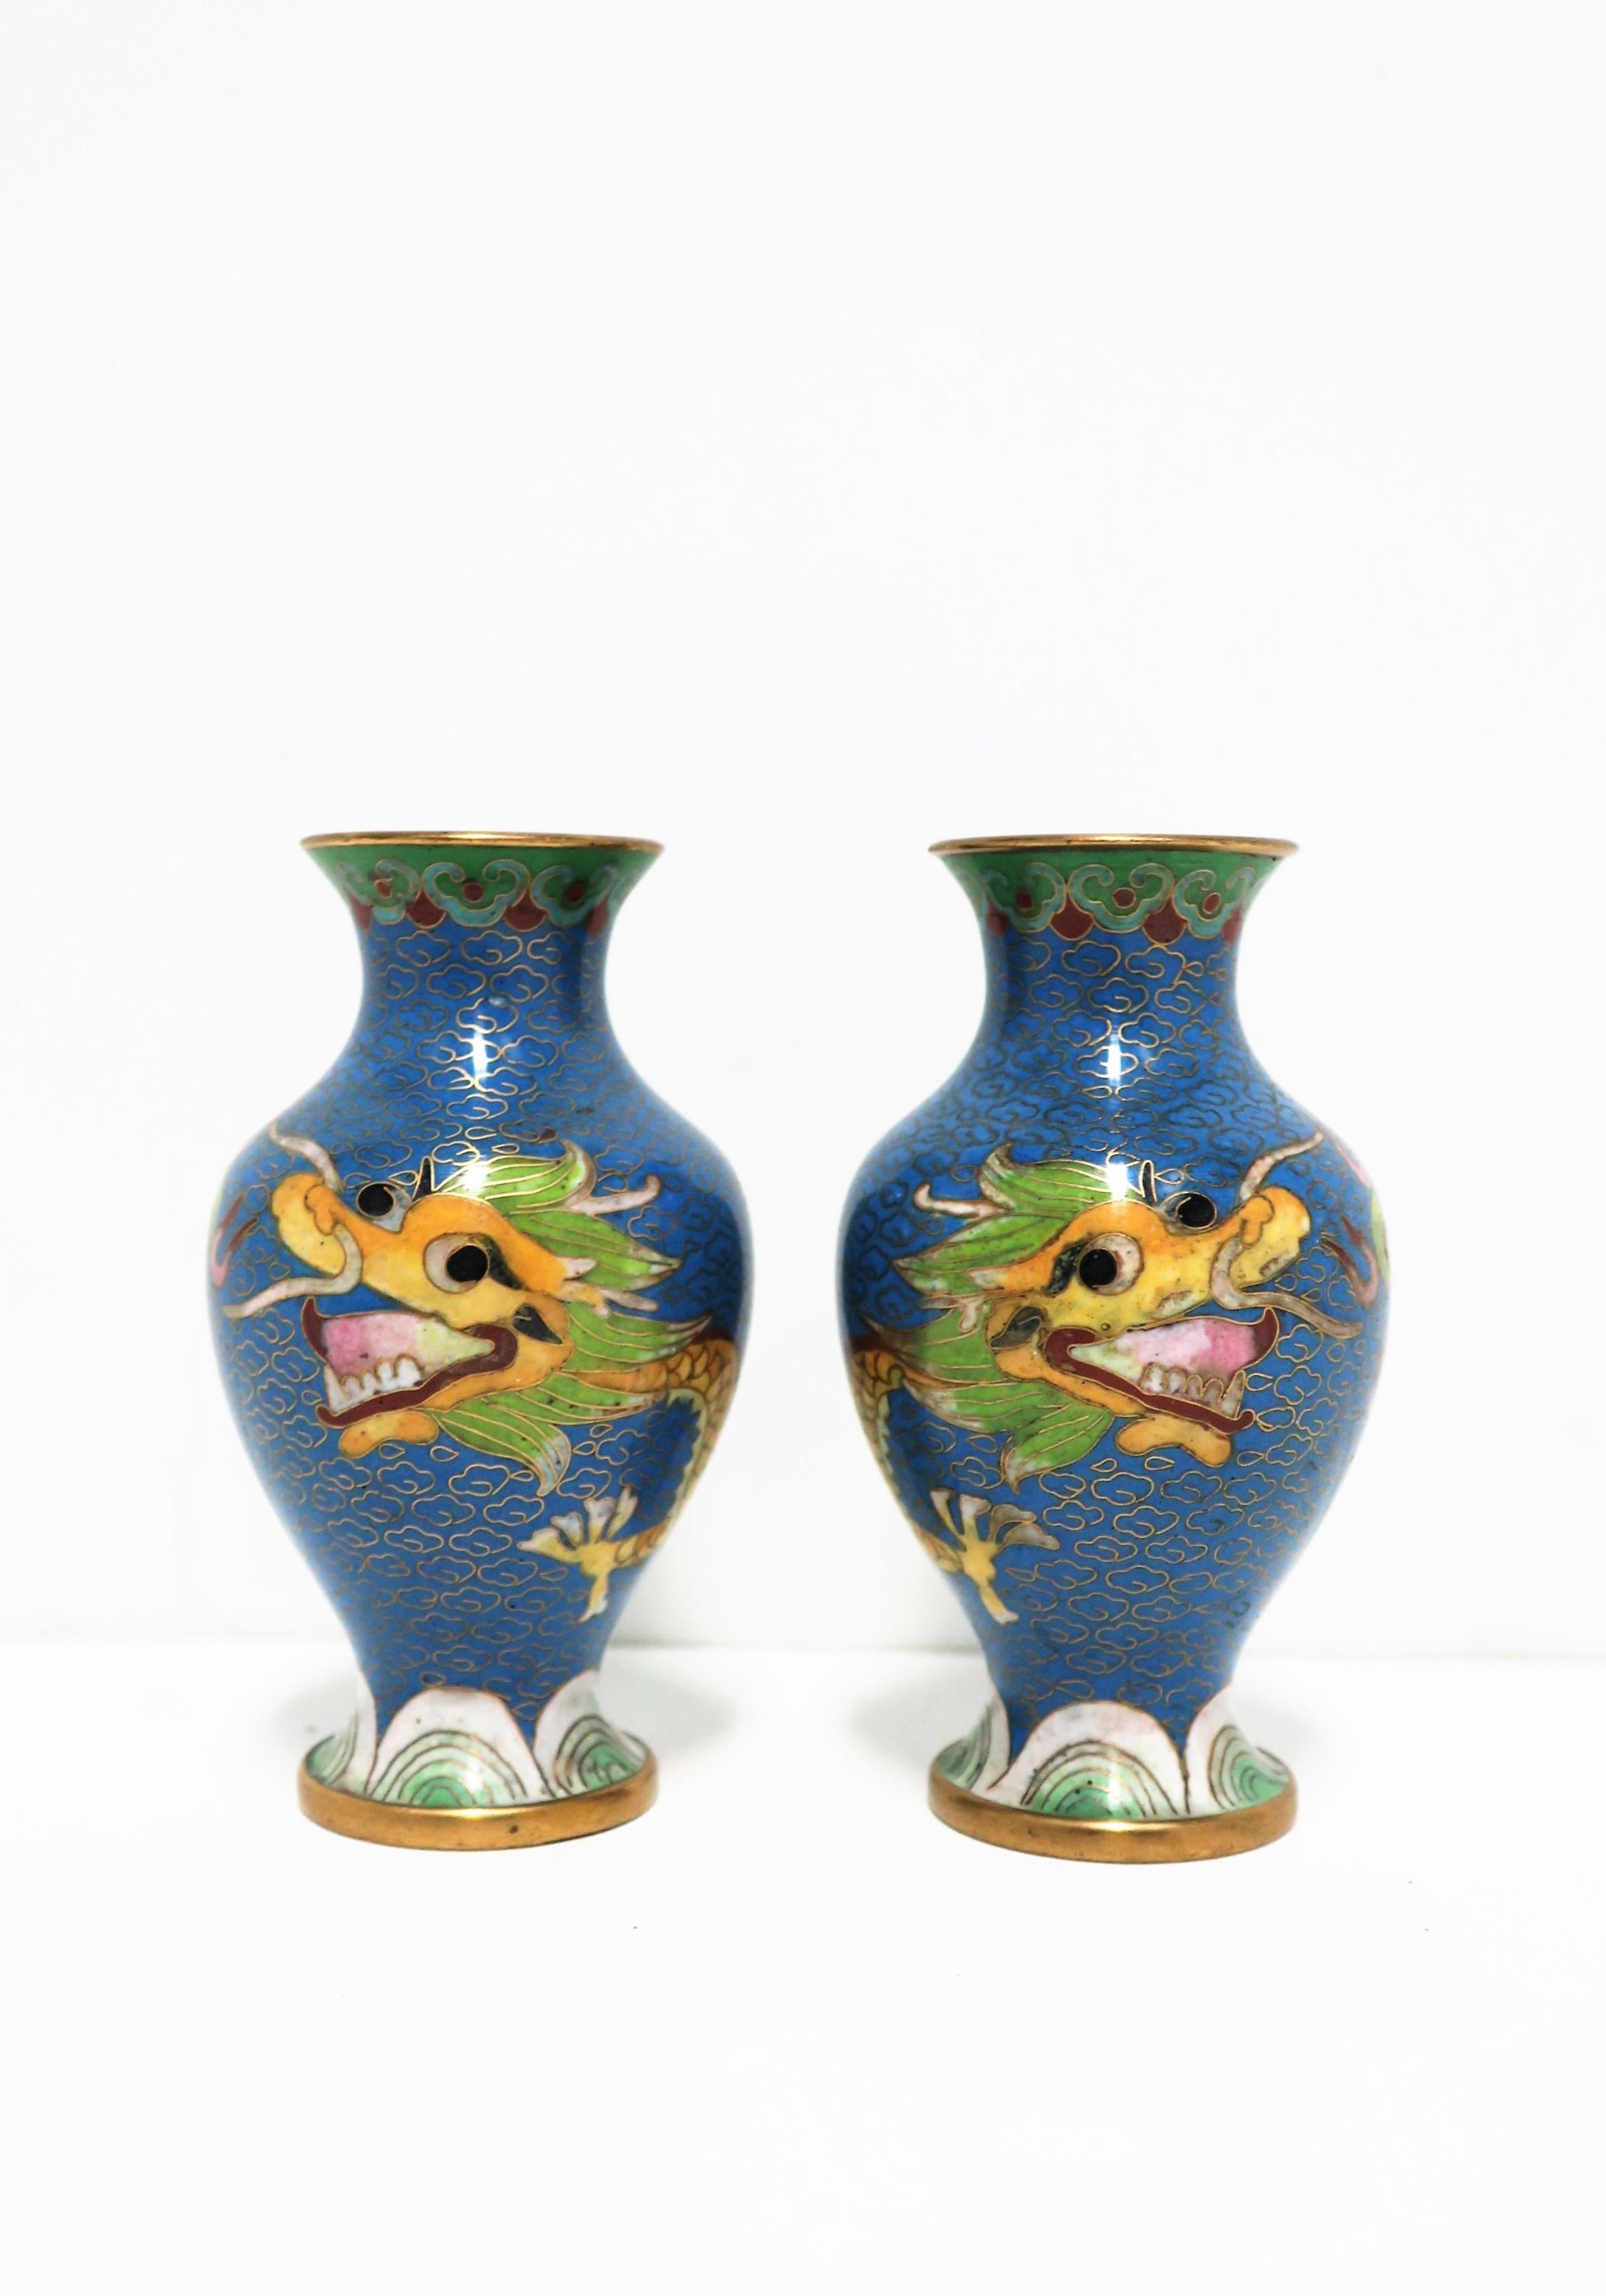 A very beautiful pair of Chinese brass and cloisonné enamel vases with dragon design, circa early to mid-20th century, China. Vases are predominantly blue; Other colors include white, green, black, pink, red, yellow, and orange. Dimensions: 2.25